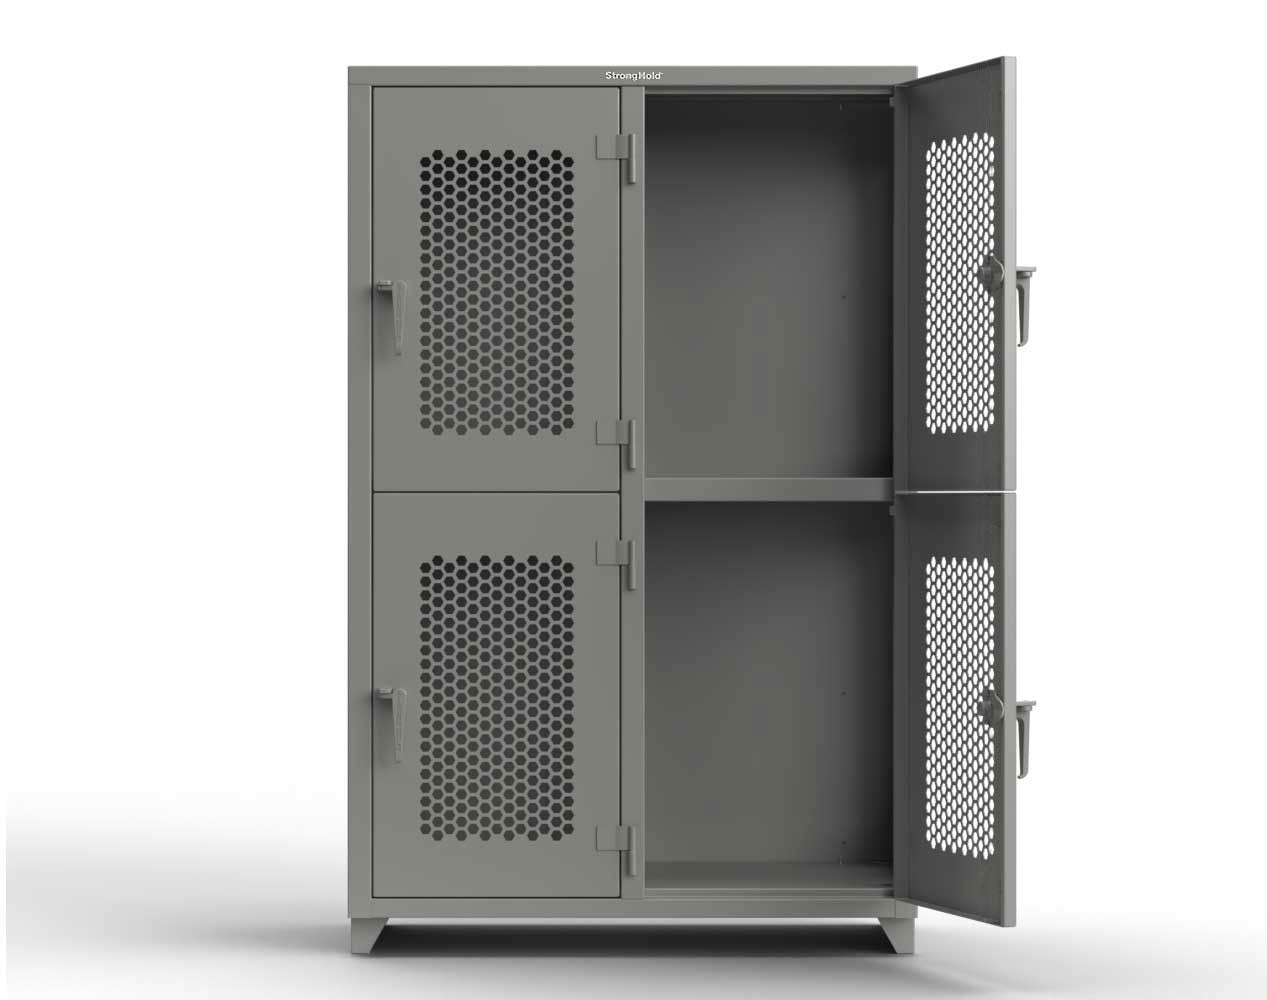 Extra Heavy Duty 14 GA Double-Tier Ventilated Locker, 4 Compartments - 48 in. W x 24 in. D x 75 in. H